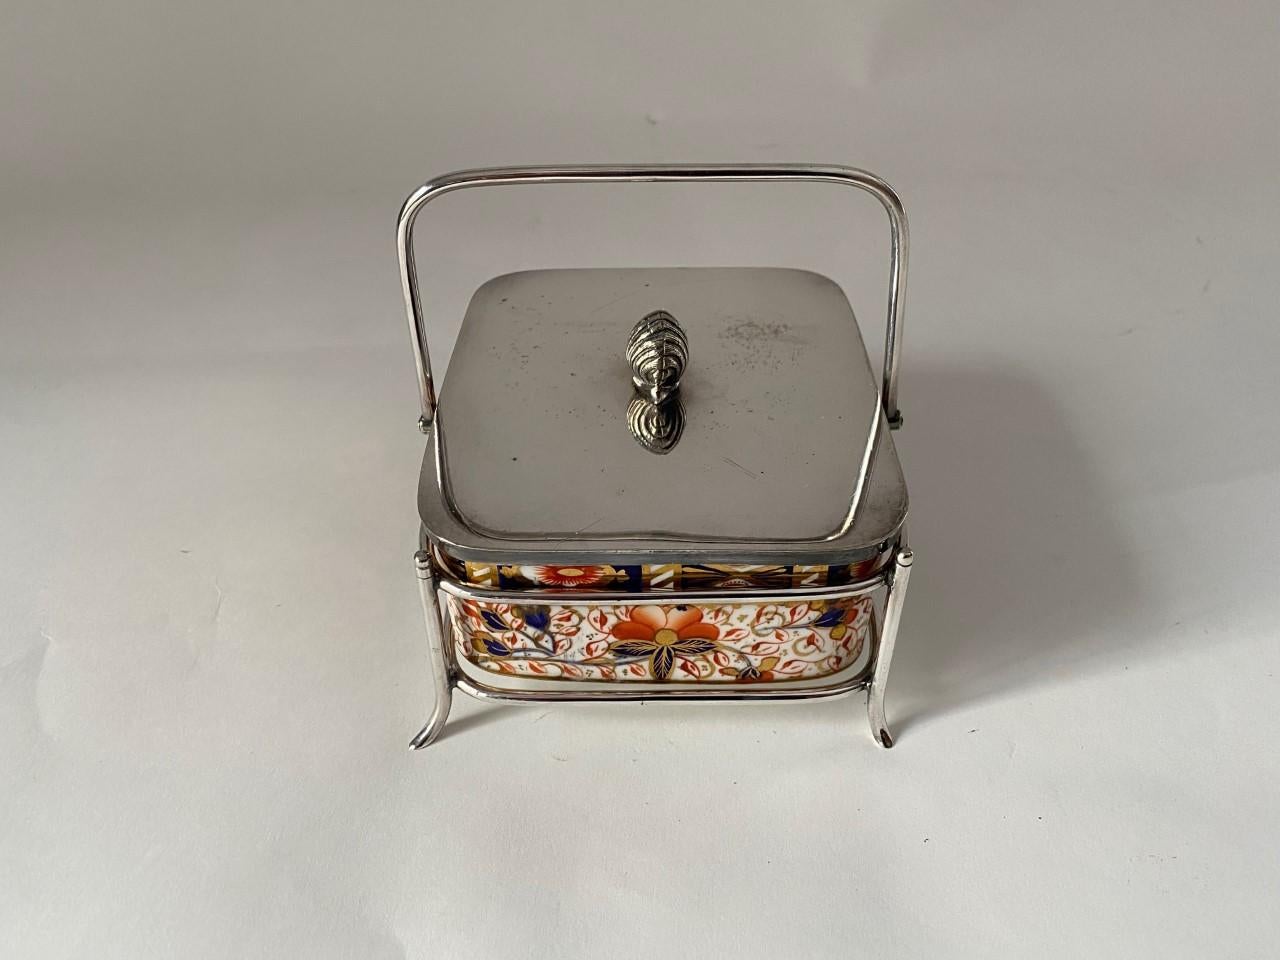 Old Decorative English Davenport Porcelain Butter Dish in Silver Plate Stand  In Good Condition For Sale In North Salem, NY